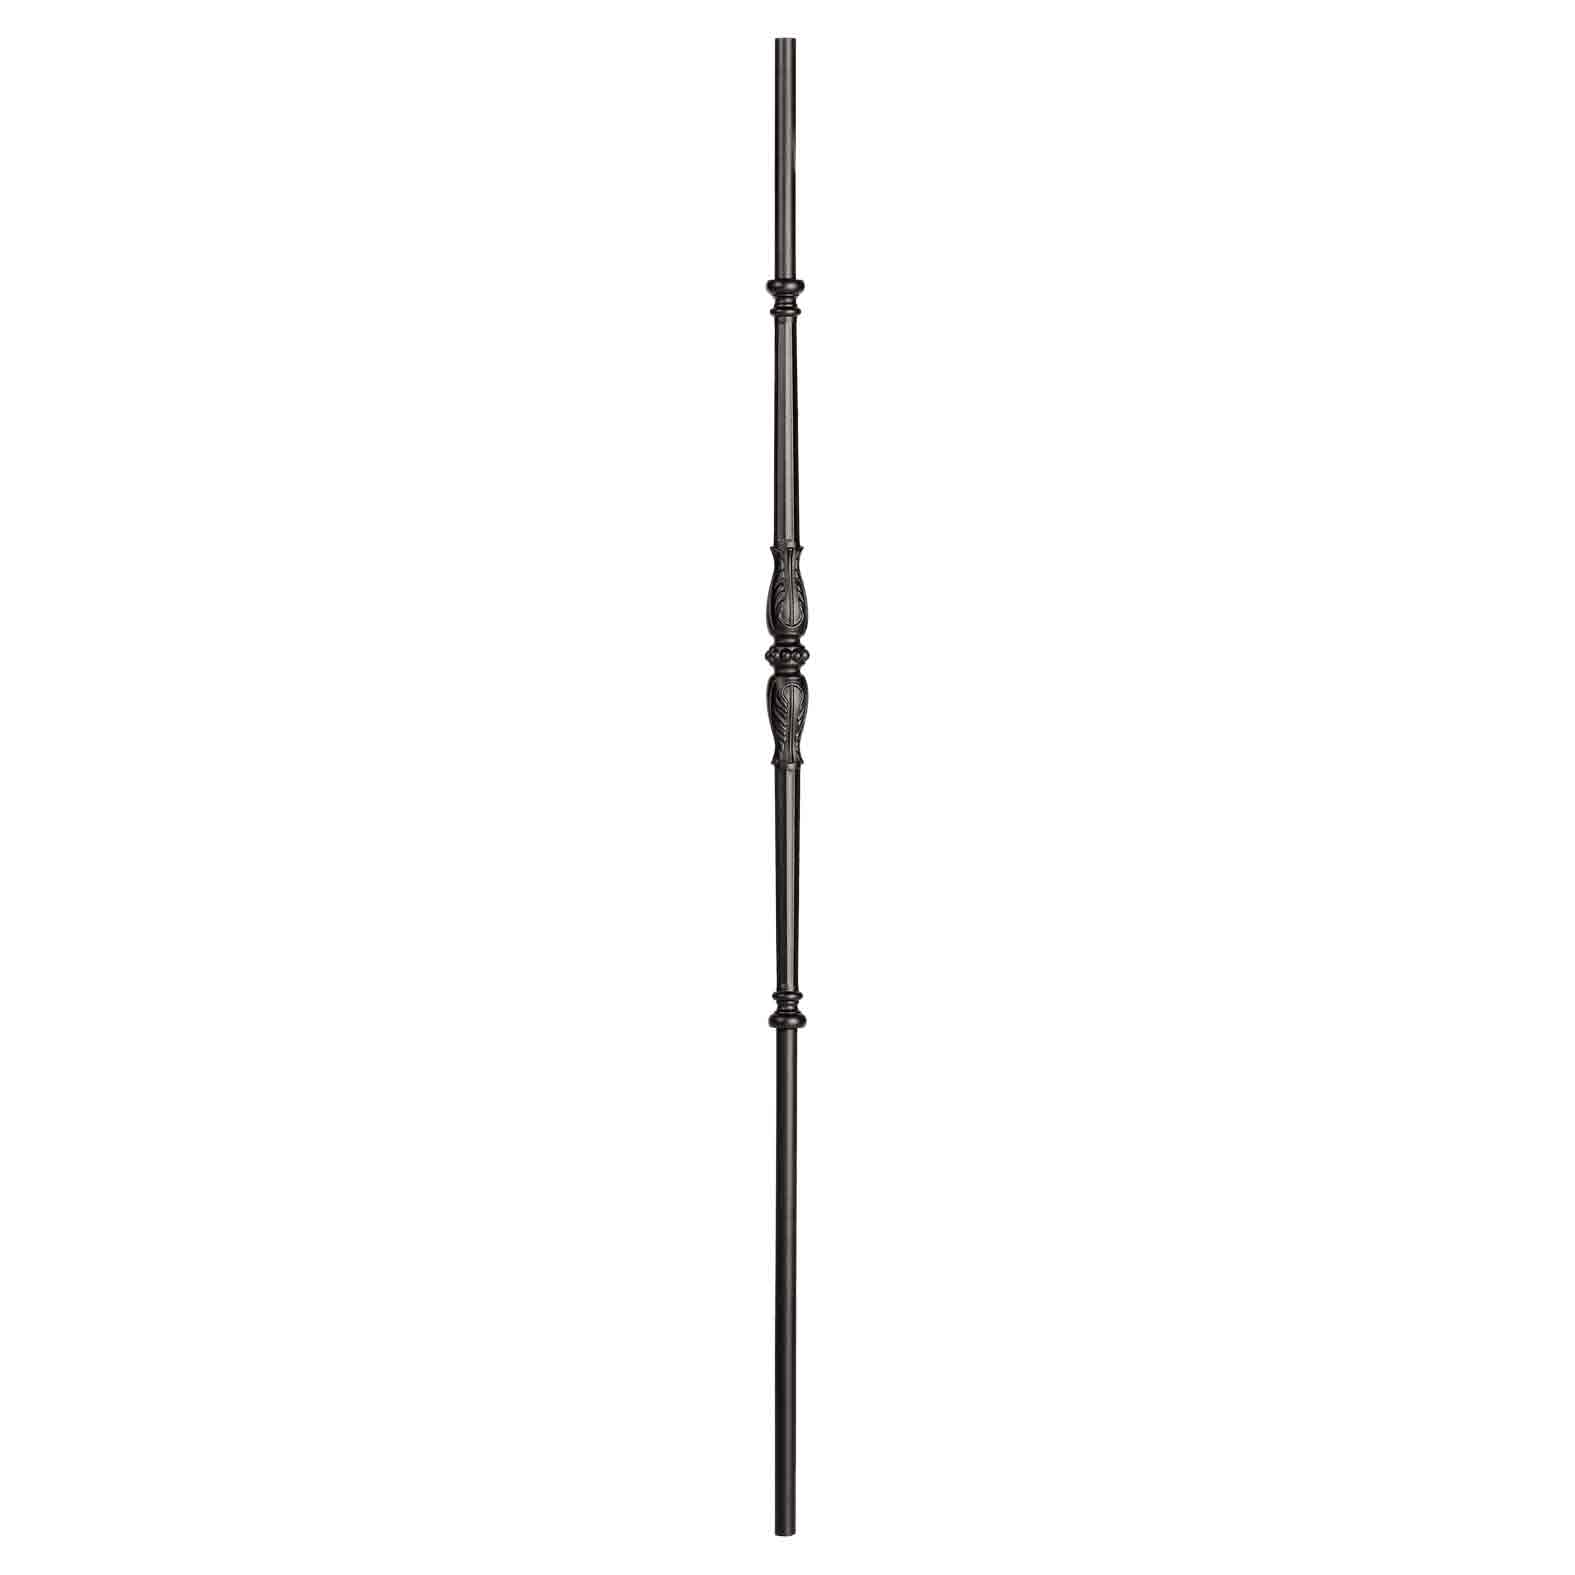 lih-HOL65044 fluted bar baluster with knuckles